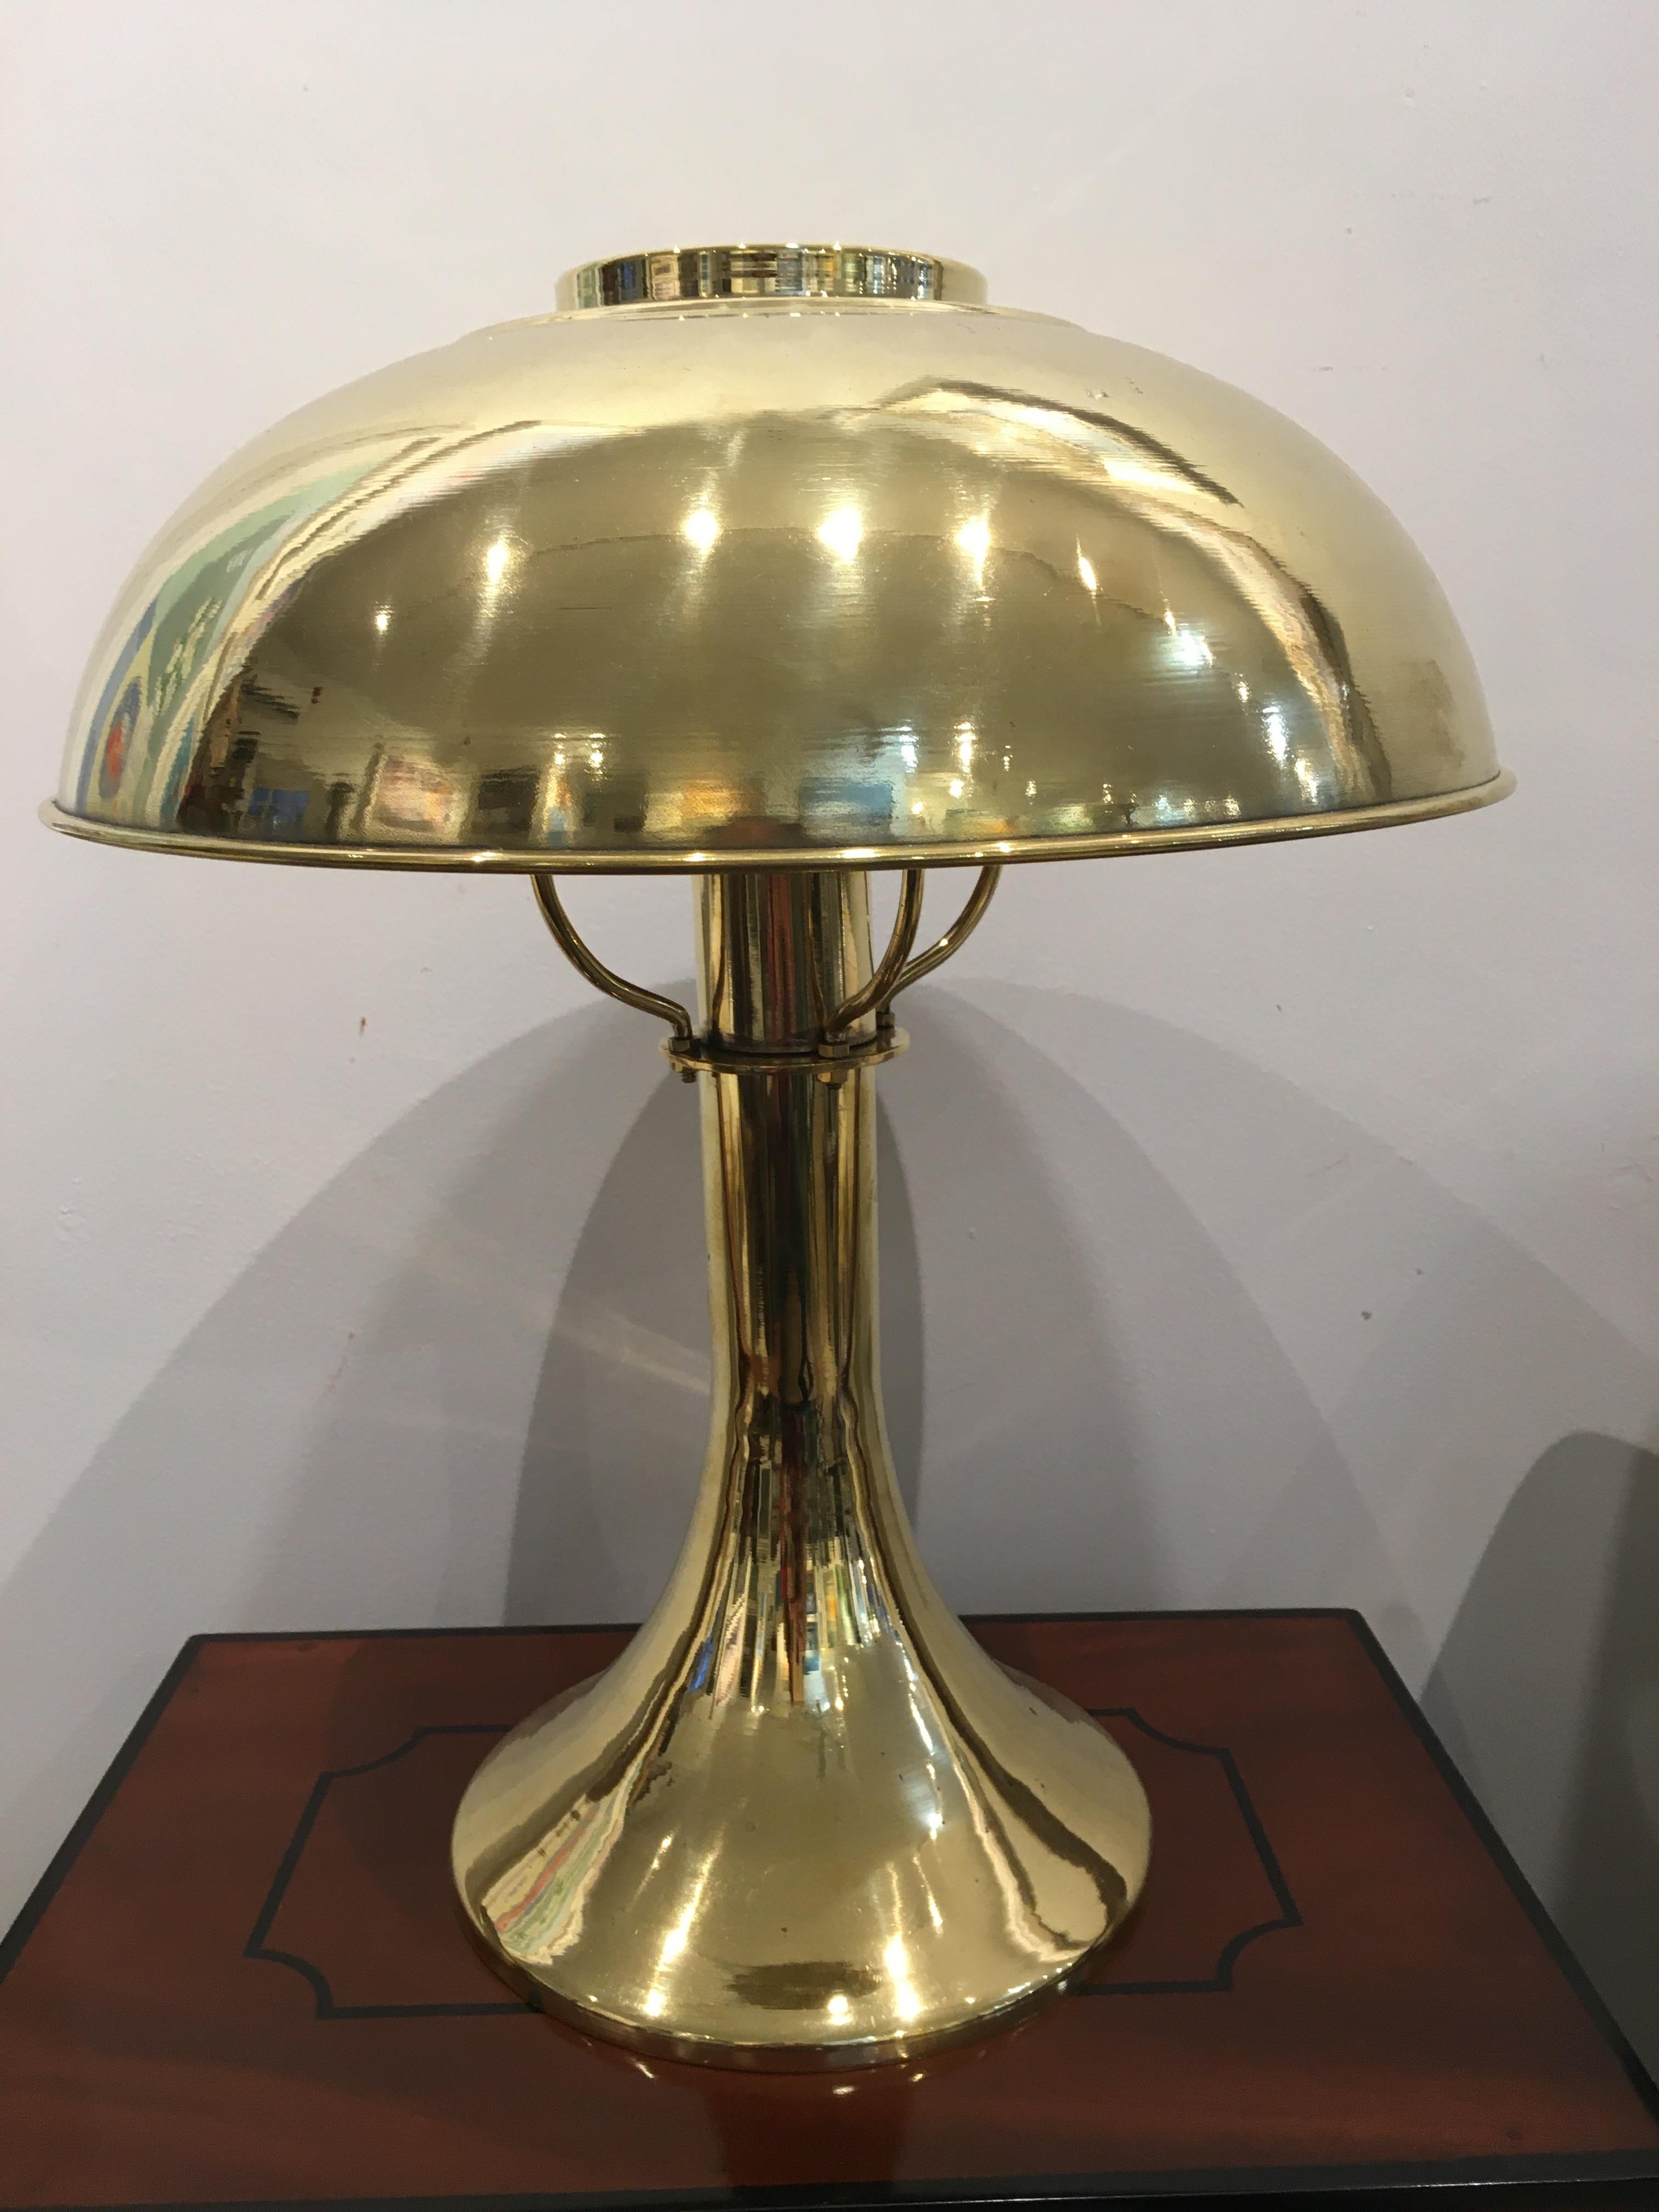 From a ship's stateroom, a pair of brass table lamps with elegant fluted base and domed brass shades. Brass has been polished and rewired for American use, originally European. Takes one standard size light bulb. Mid-Century Modern. Base has an 8